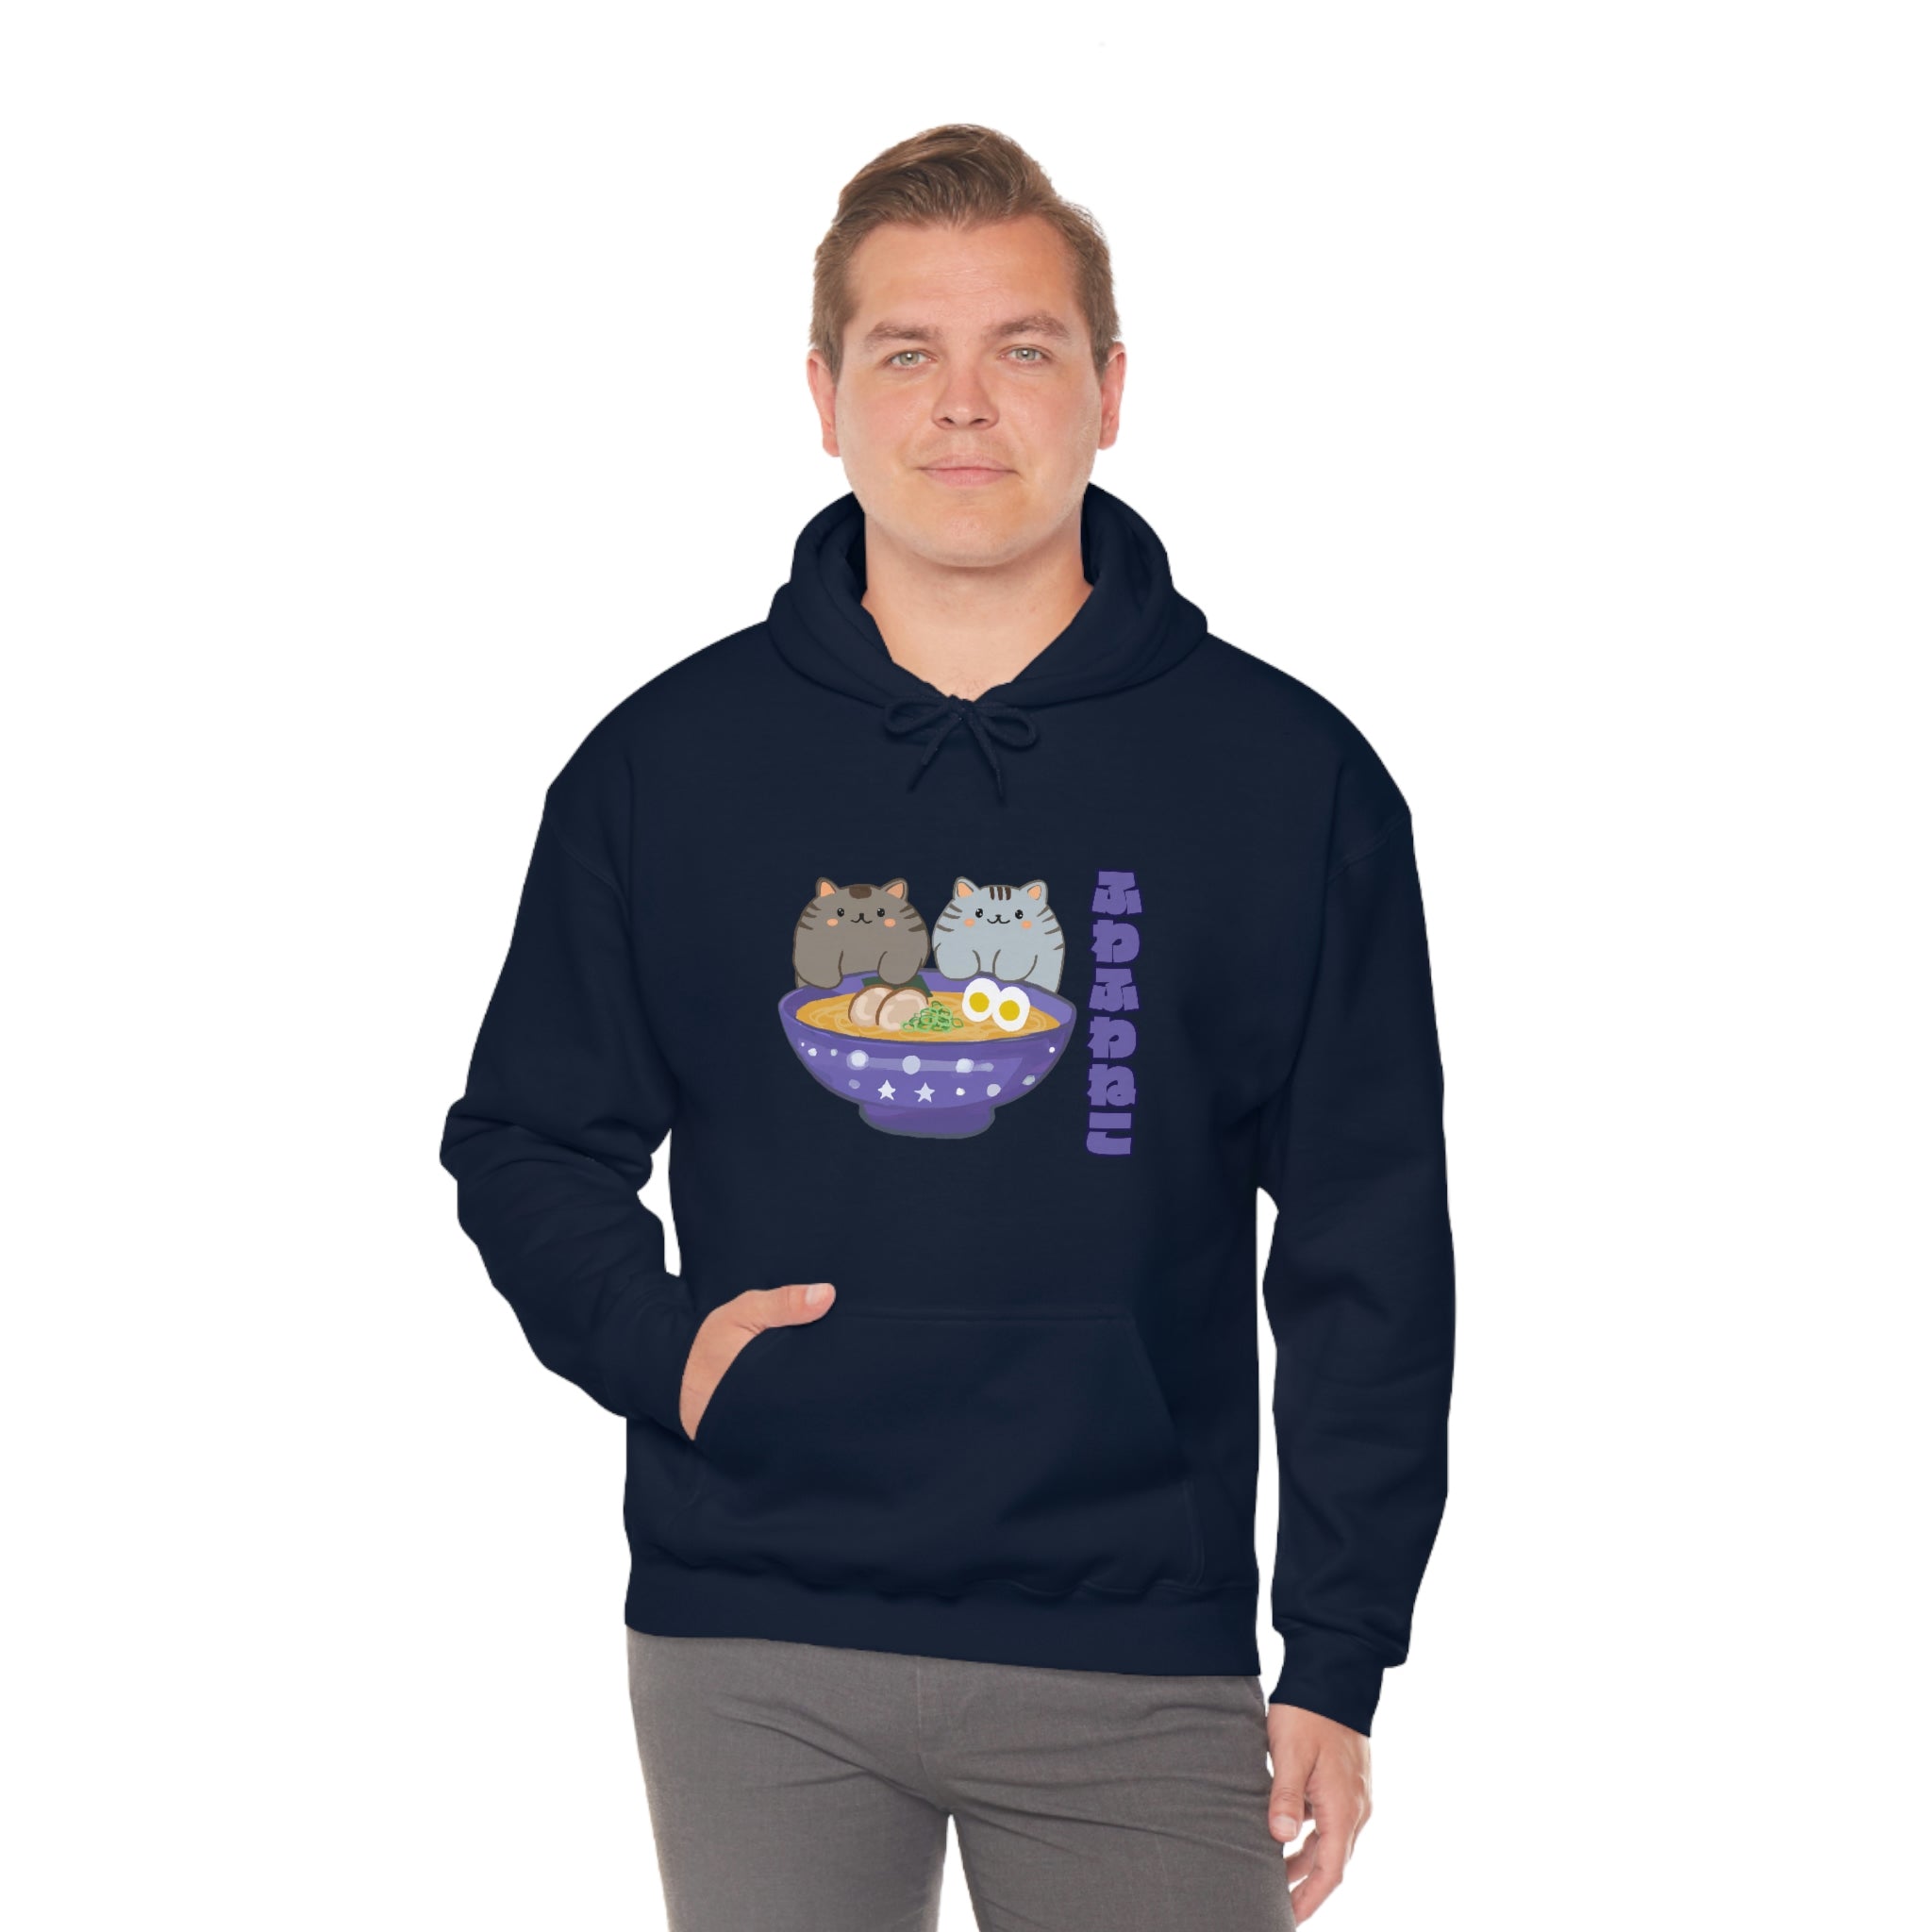 Ramen Hoodie - Noodle Loving Kitty Cats: A Foodie's Dream Asian-Inspired Pun Hoodie